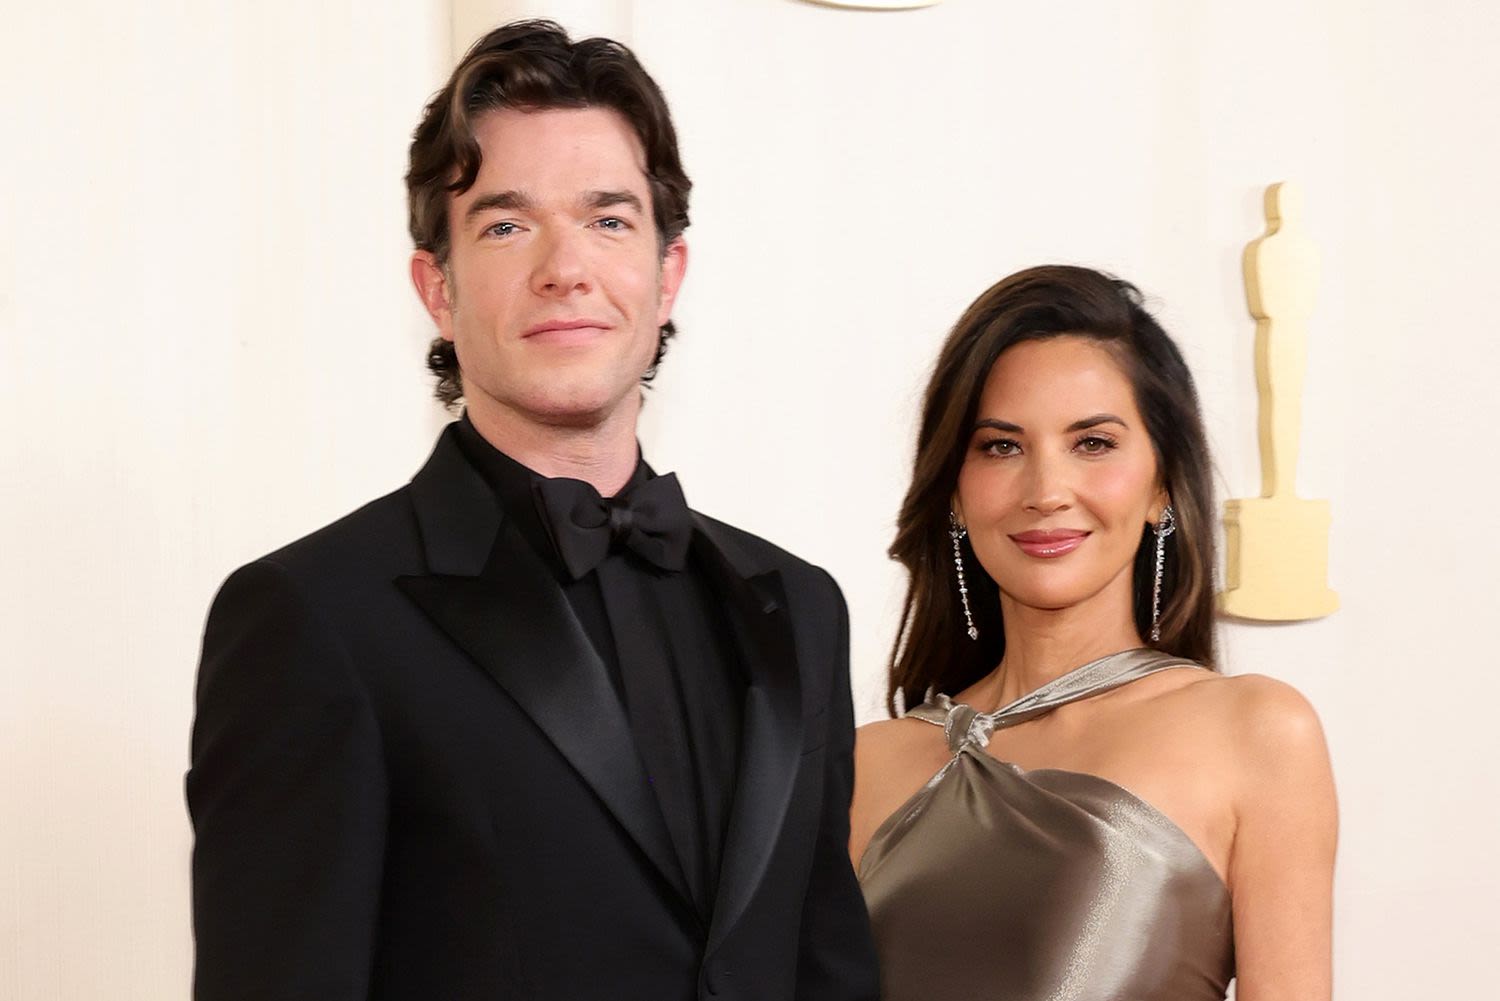 Olivia Munn Reveals She Froze Her Eggs to Have Future Babies with John Mulaney